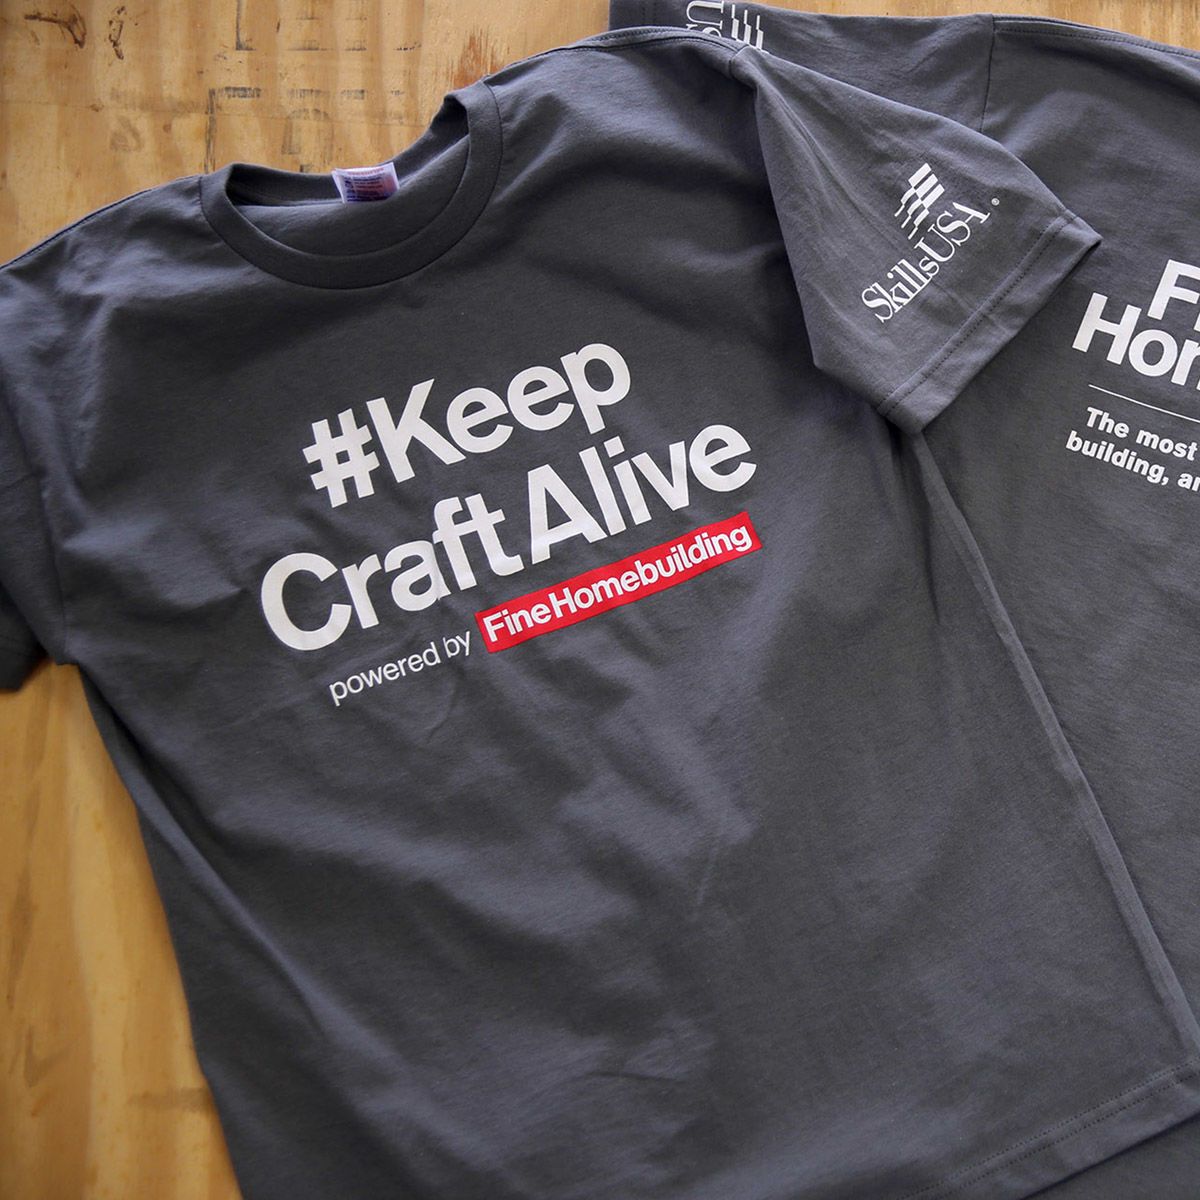 A new design for the #KeepCraftAlive tee-shirt.